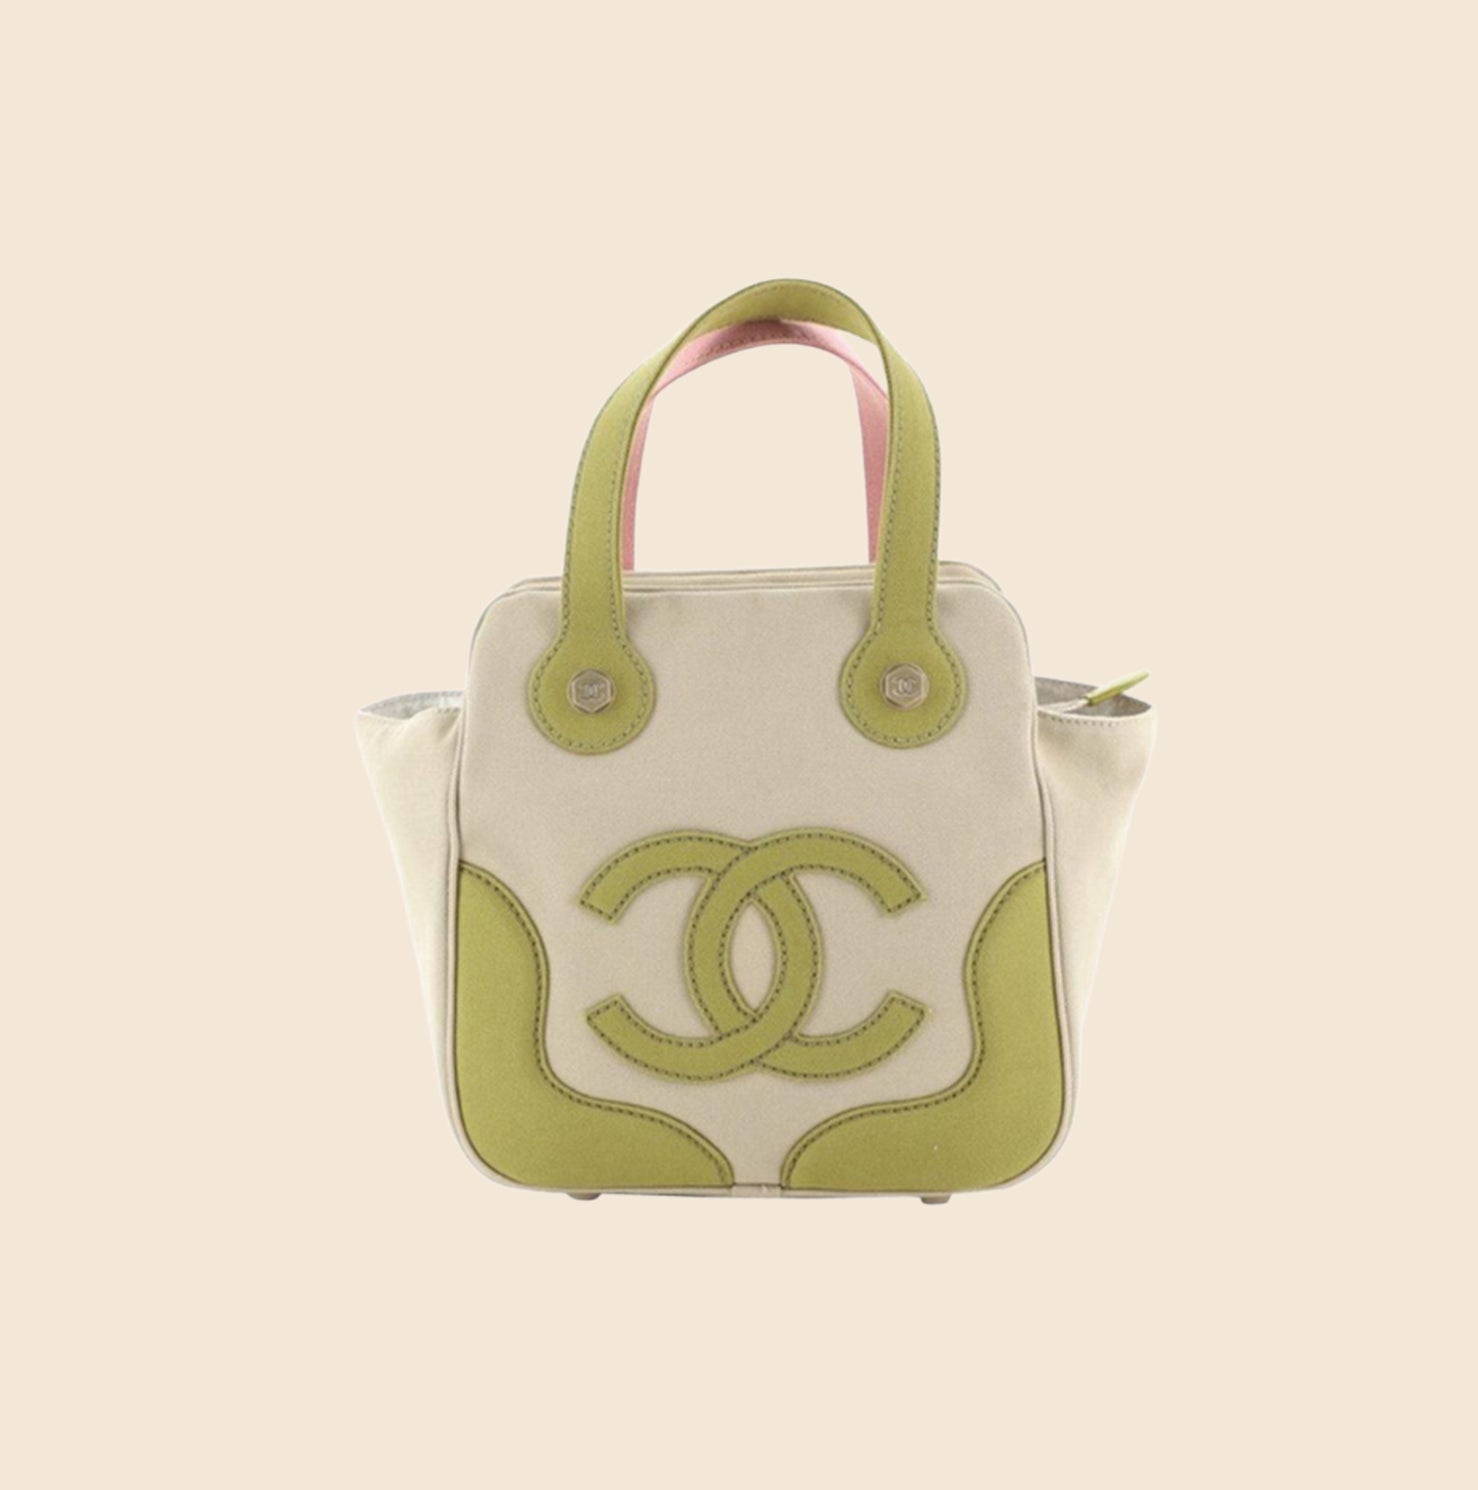 Chanel Pre-owned 1990s Travel Line Tote Bag